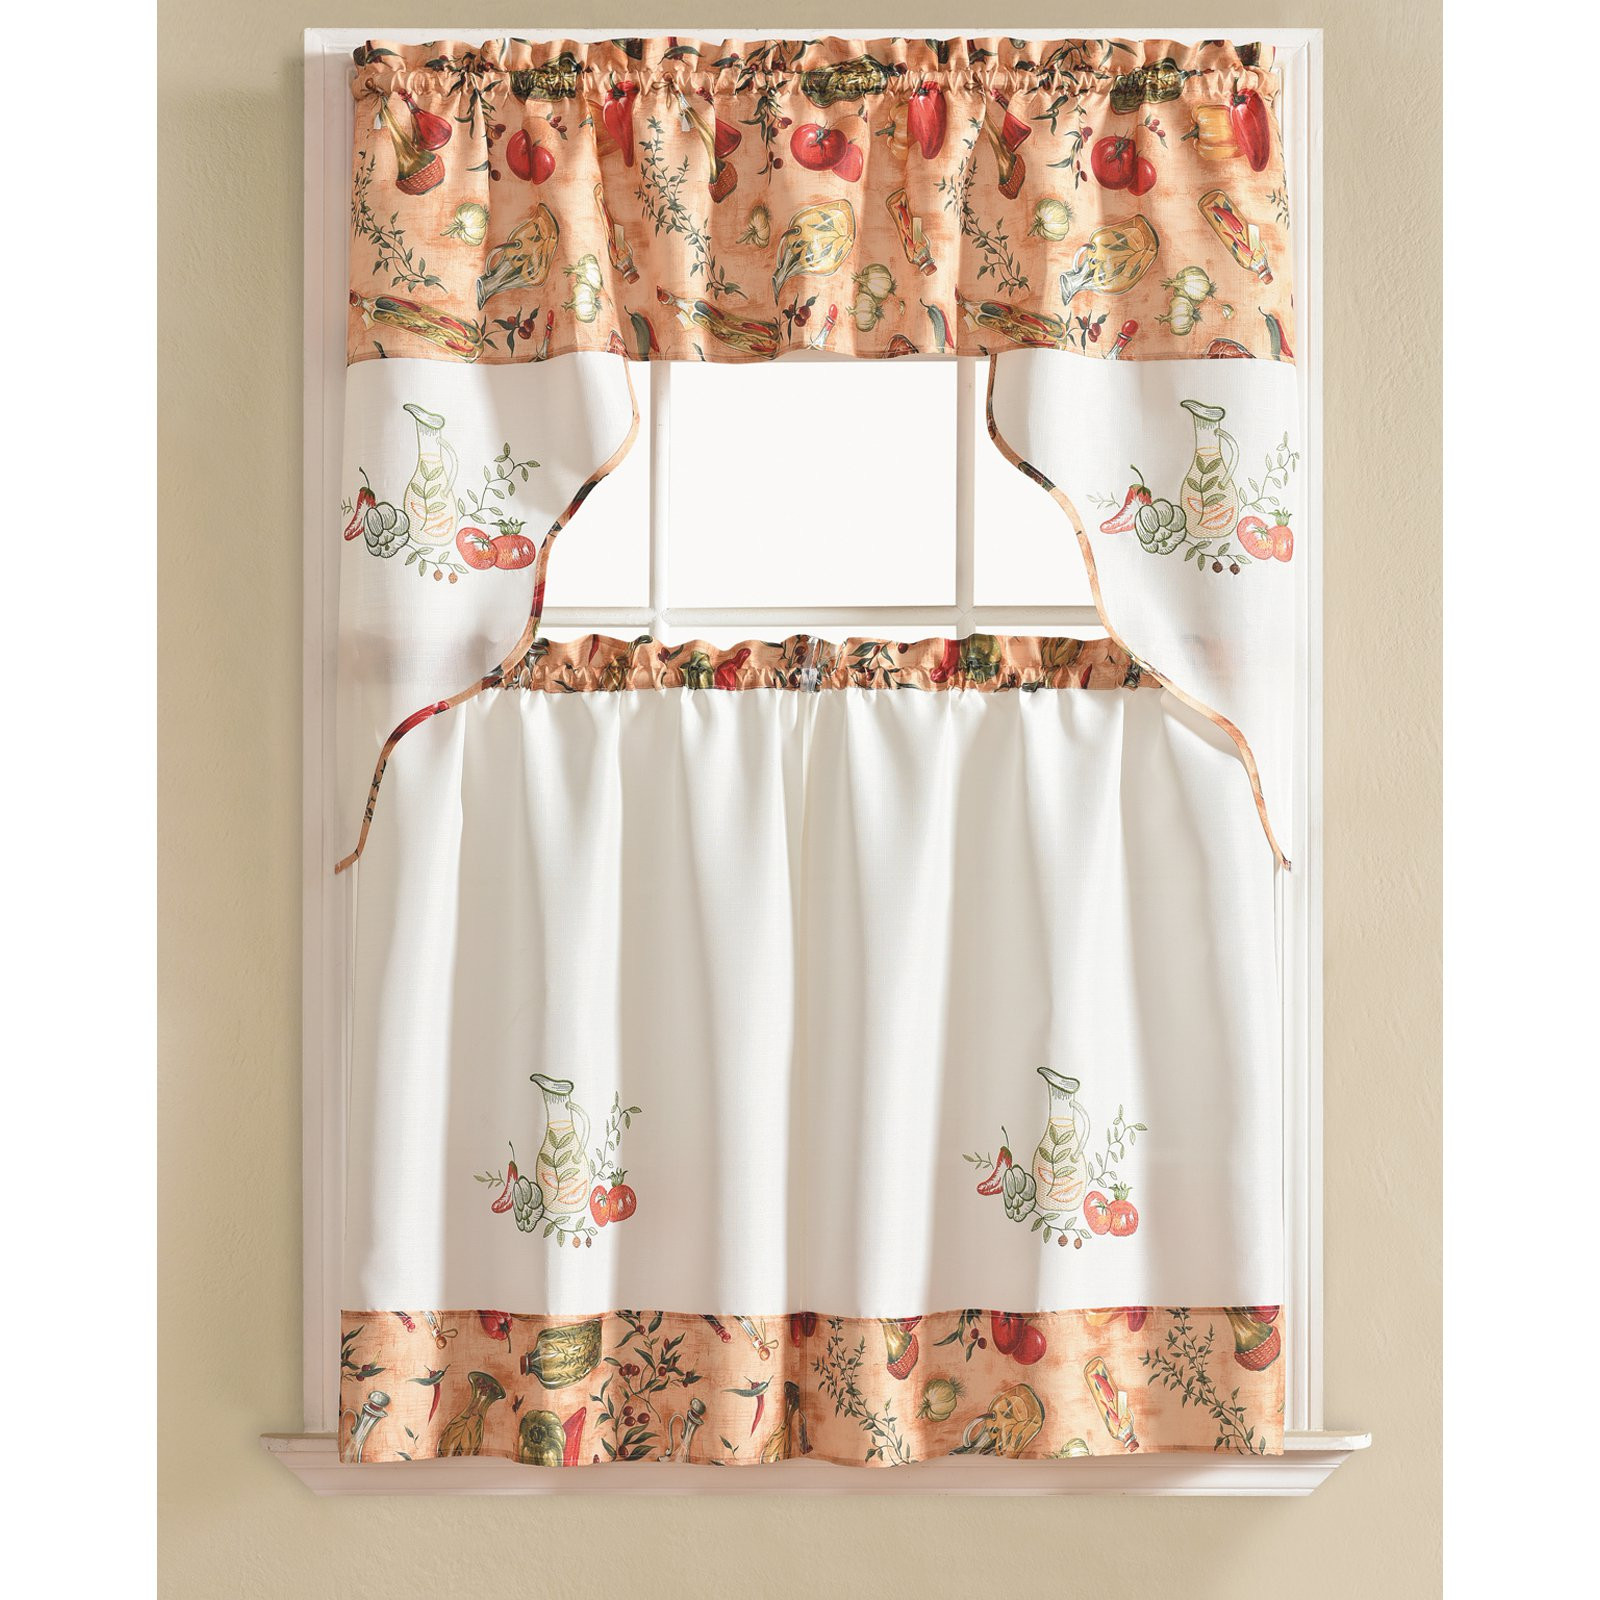 Walmart Com Kitchen Curtains
 Urban Embroidered Ve able Tier and Valance Kitchen